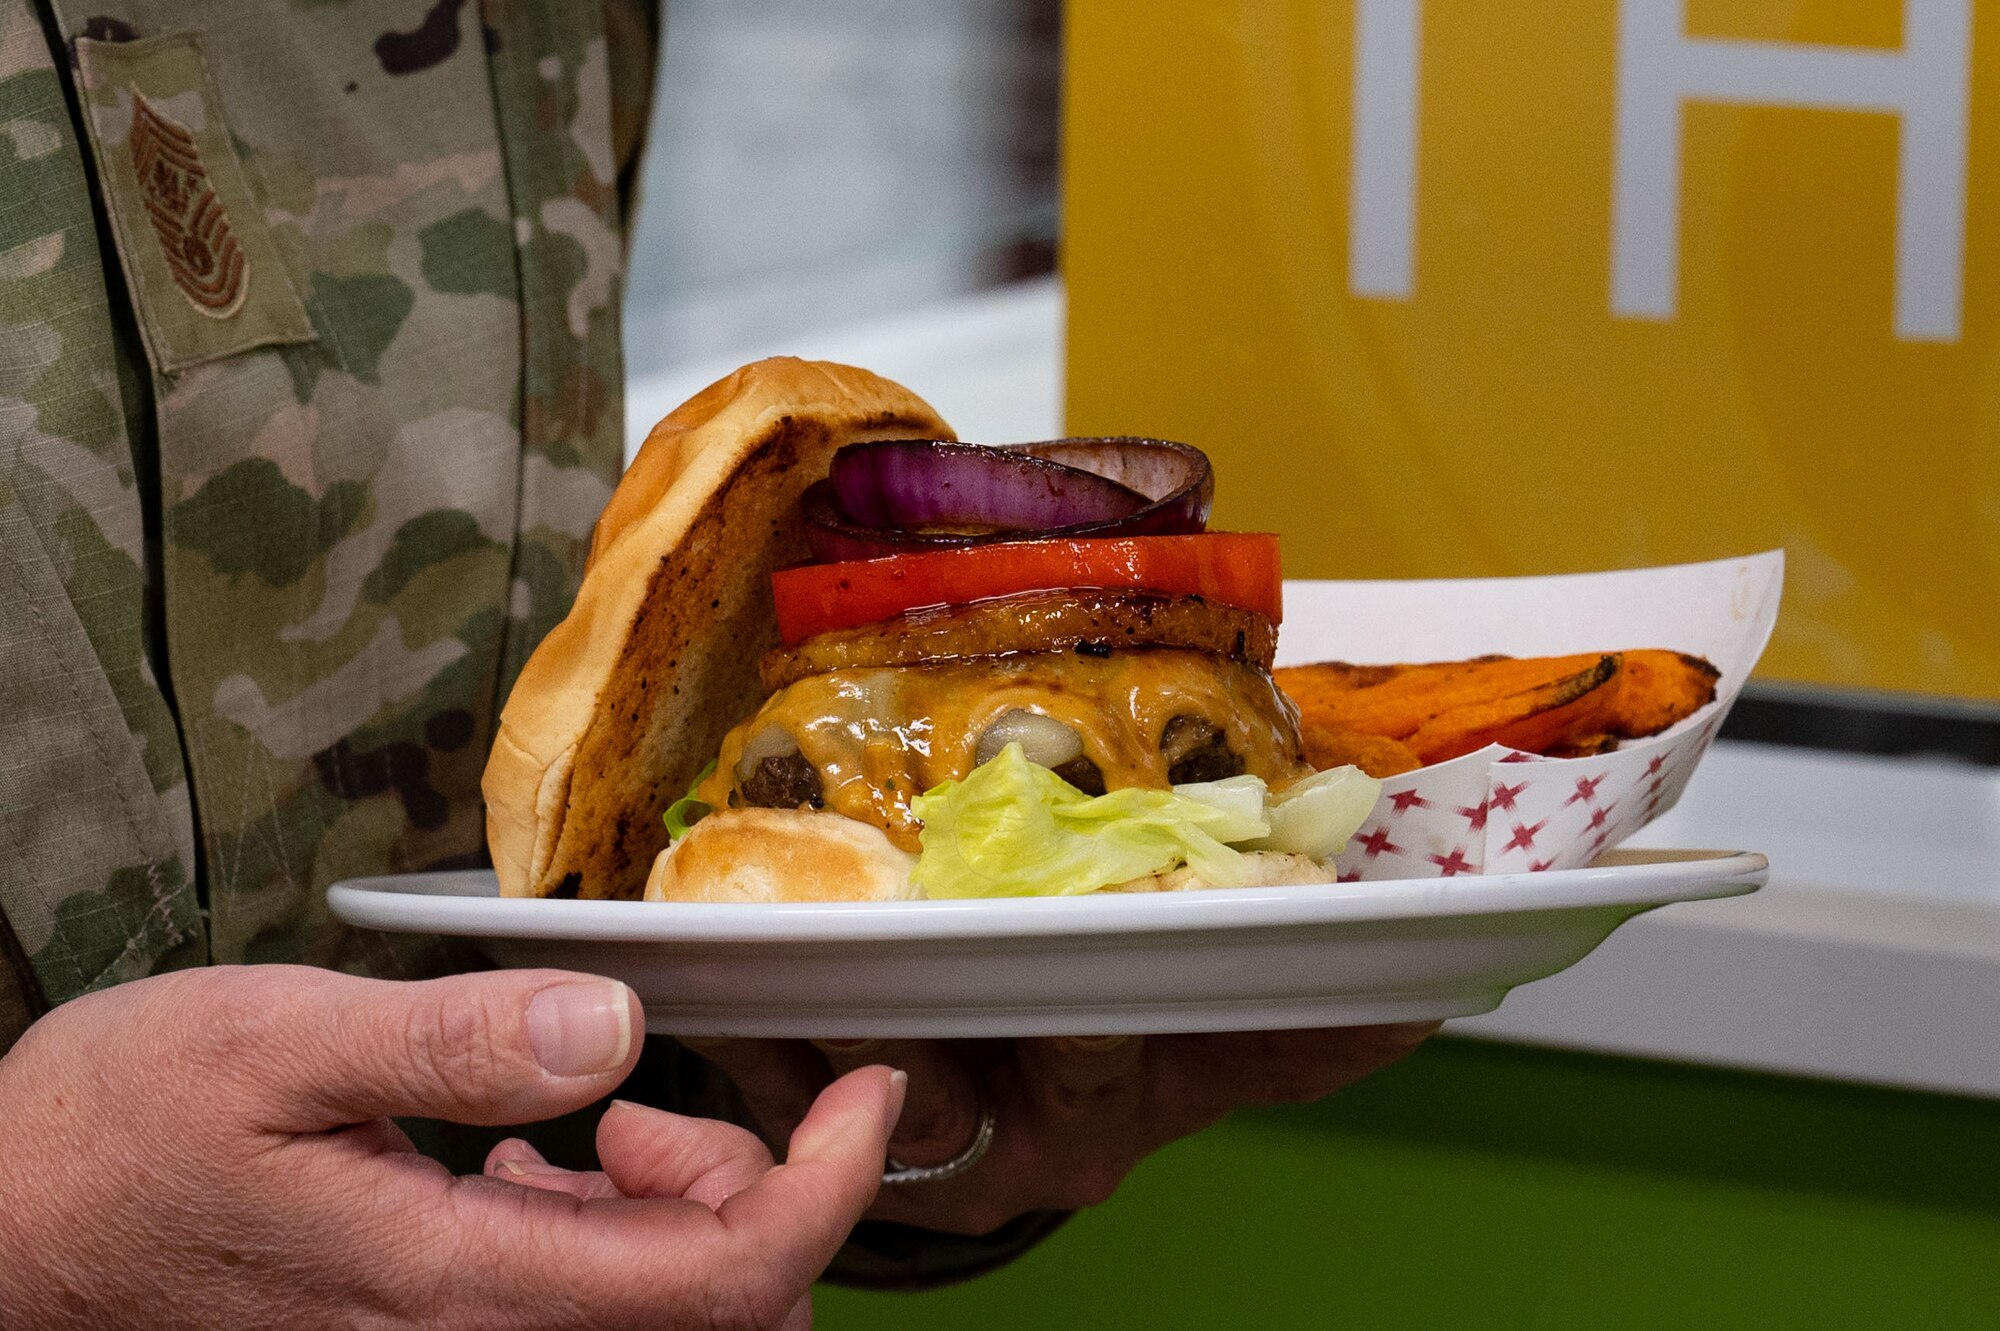 Chief Master Sgt. of the Air Force JoAnne S. Bass, receives an Airman’s signature burger, during a visit at Nellis Air Force Base, Nevada, May 2, 2023.